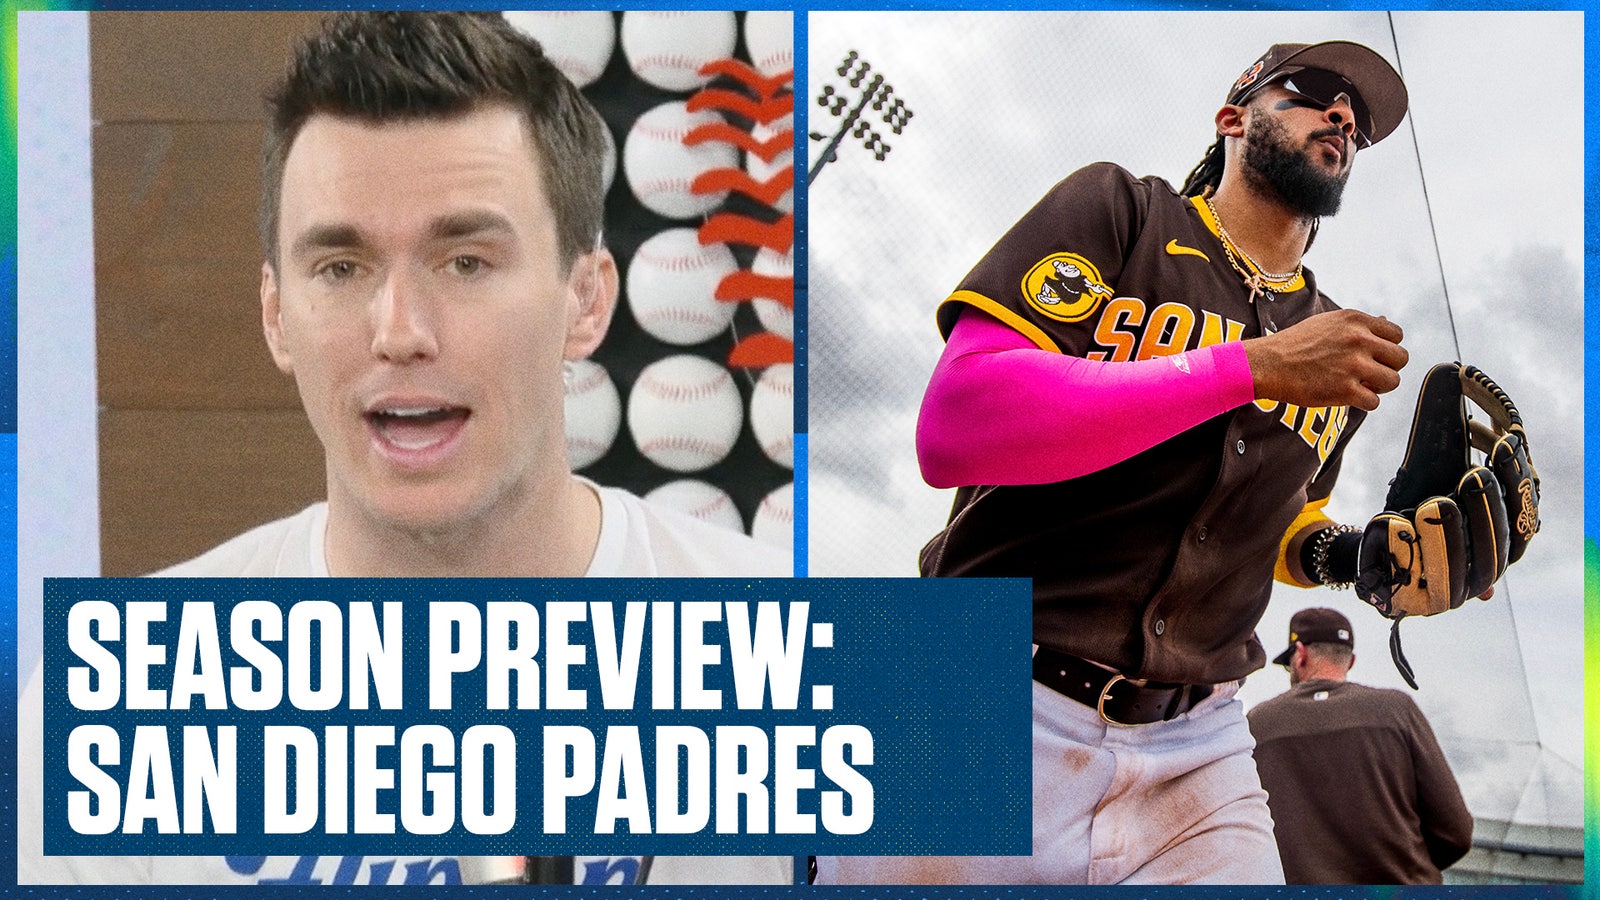 Padres season preview: Can they overtake the Dodgers as king of the West?